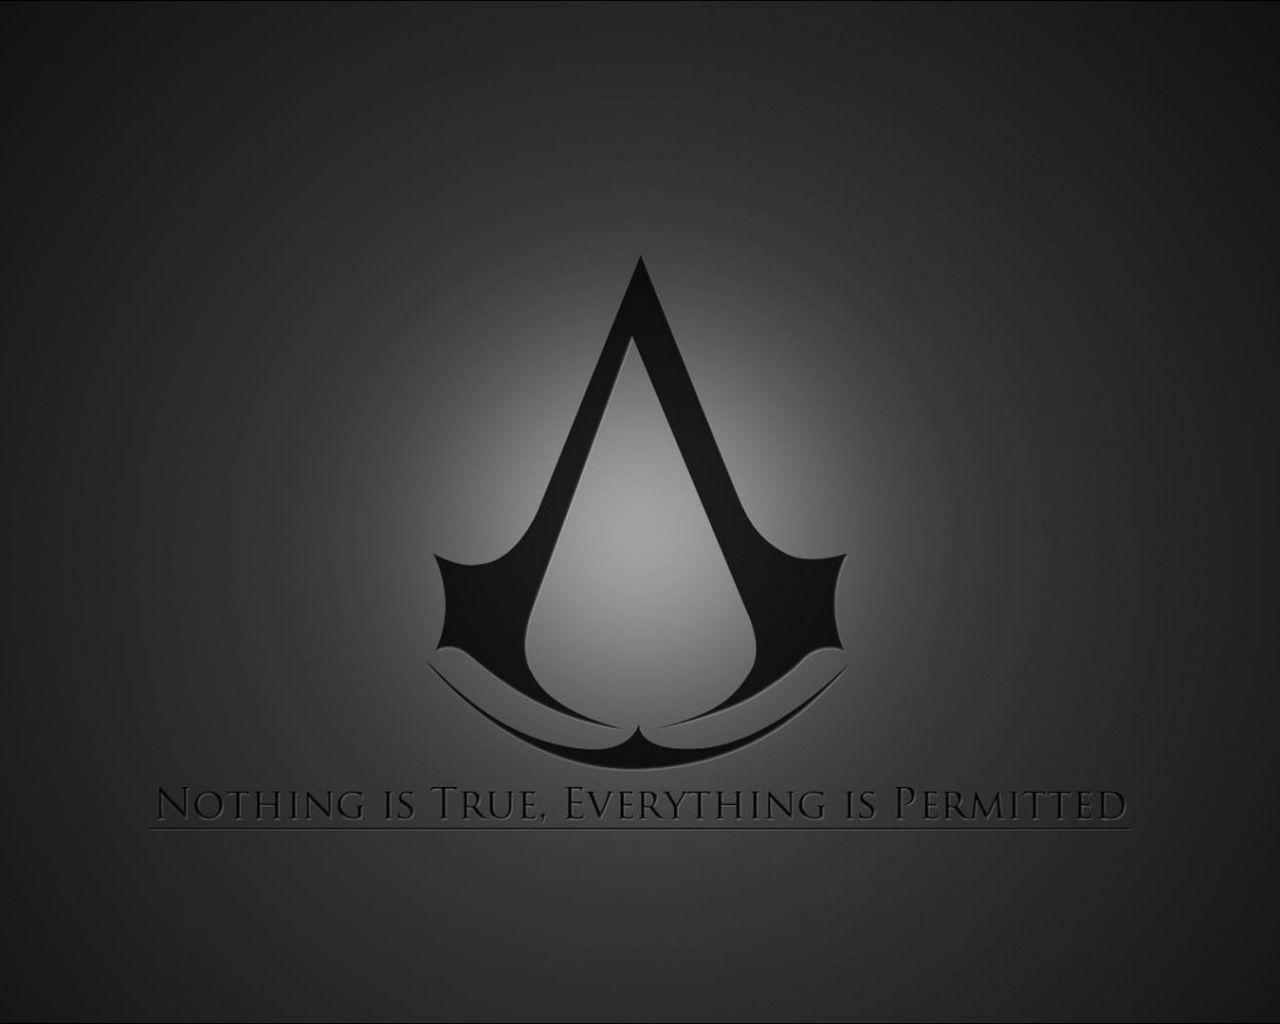 Download Assassin&;s Creed Logo Wallpaper in 1280x1024 Resolution